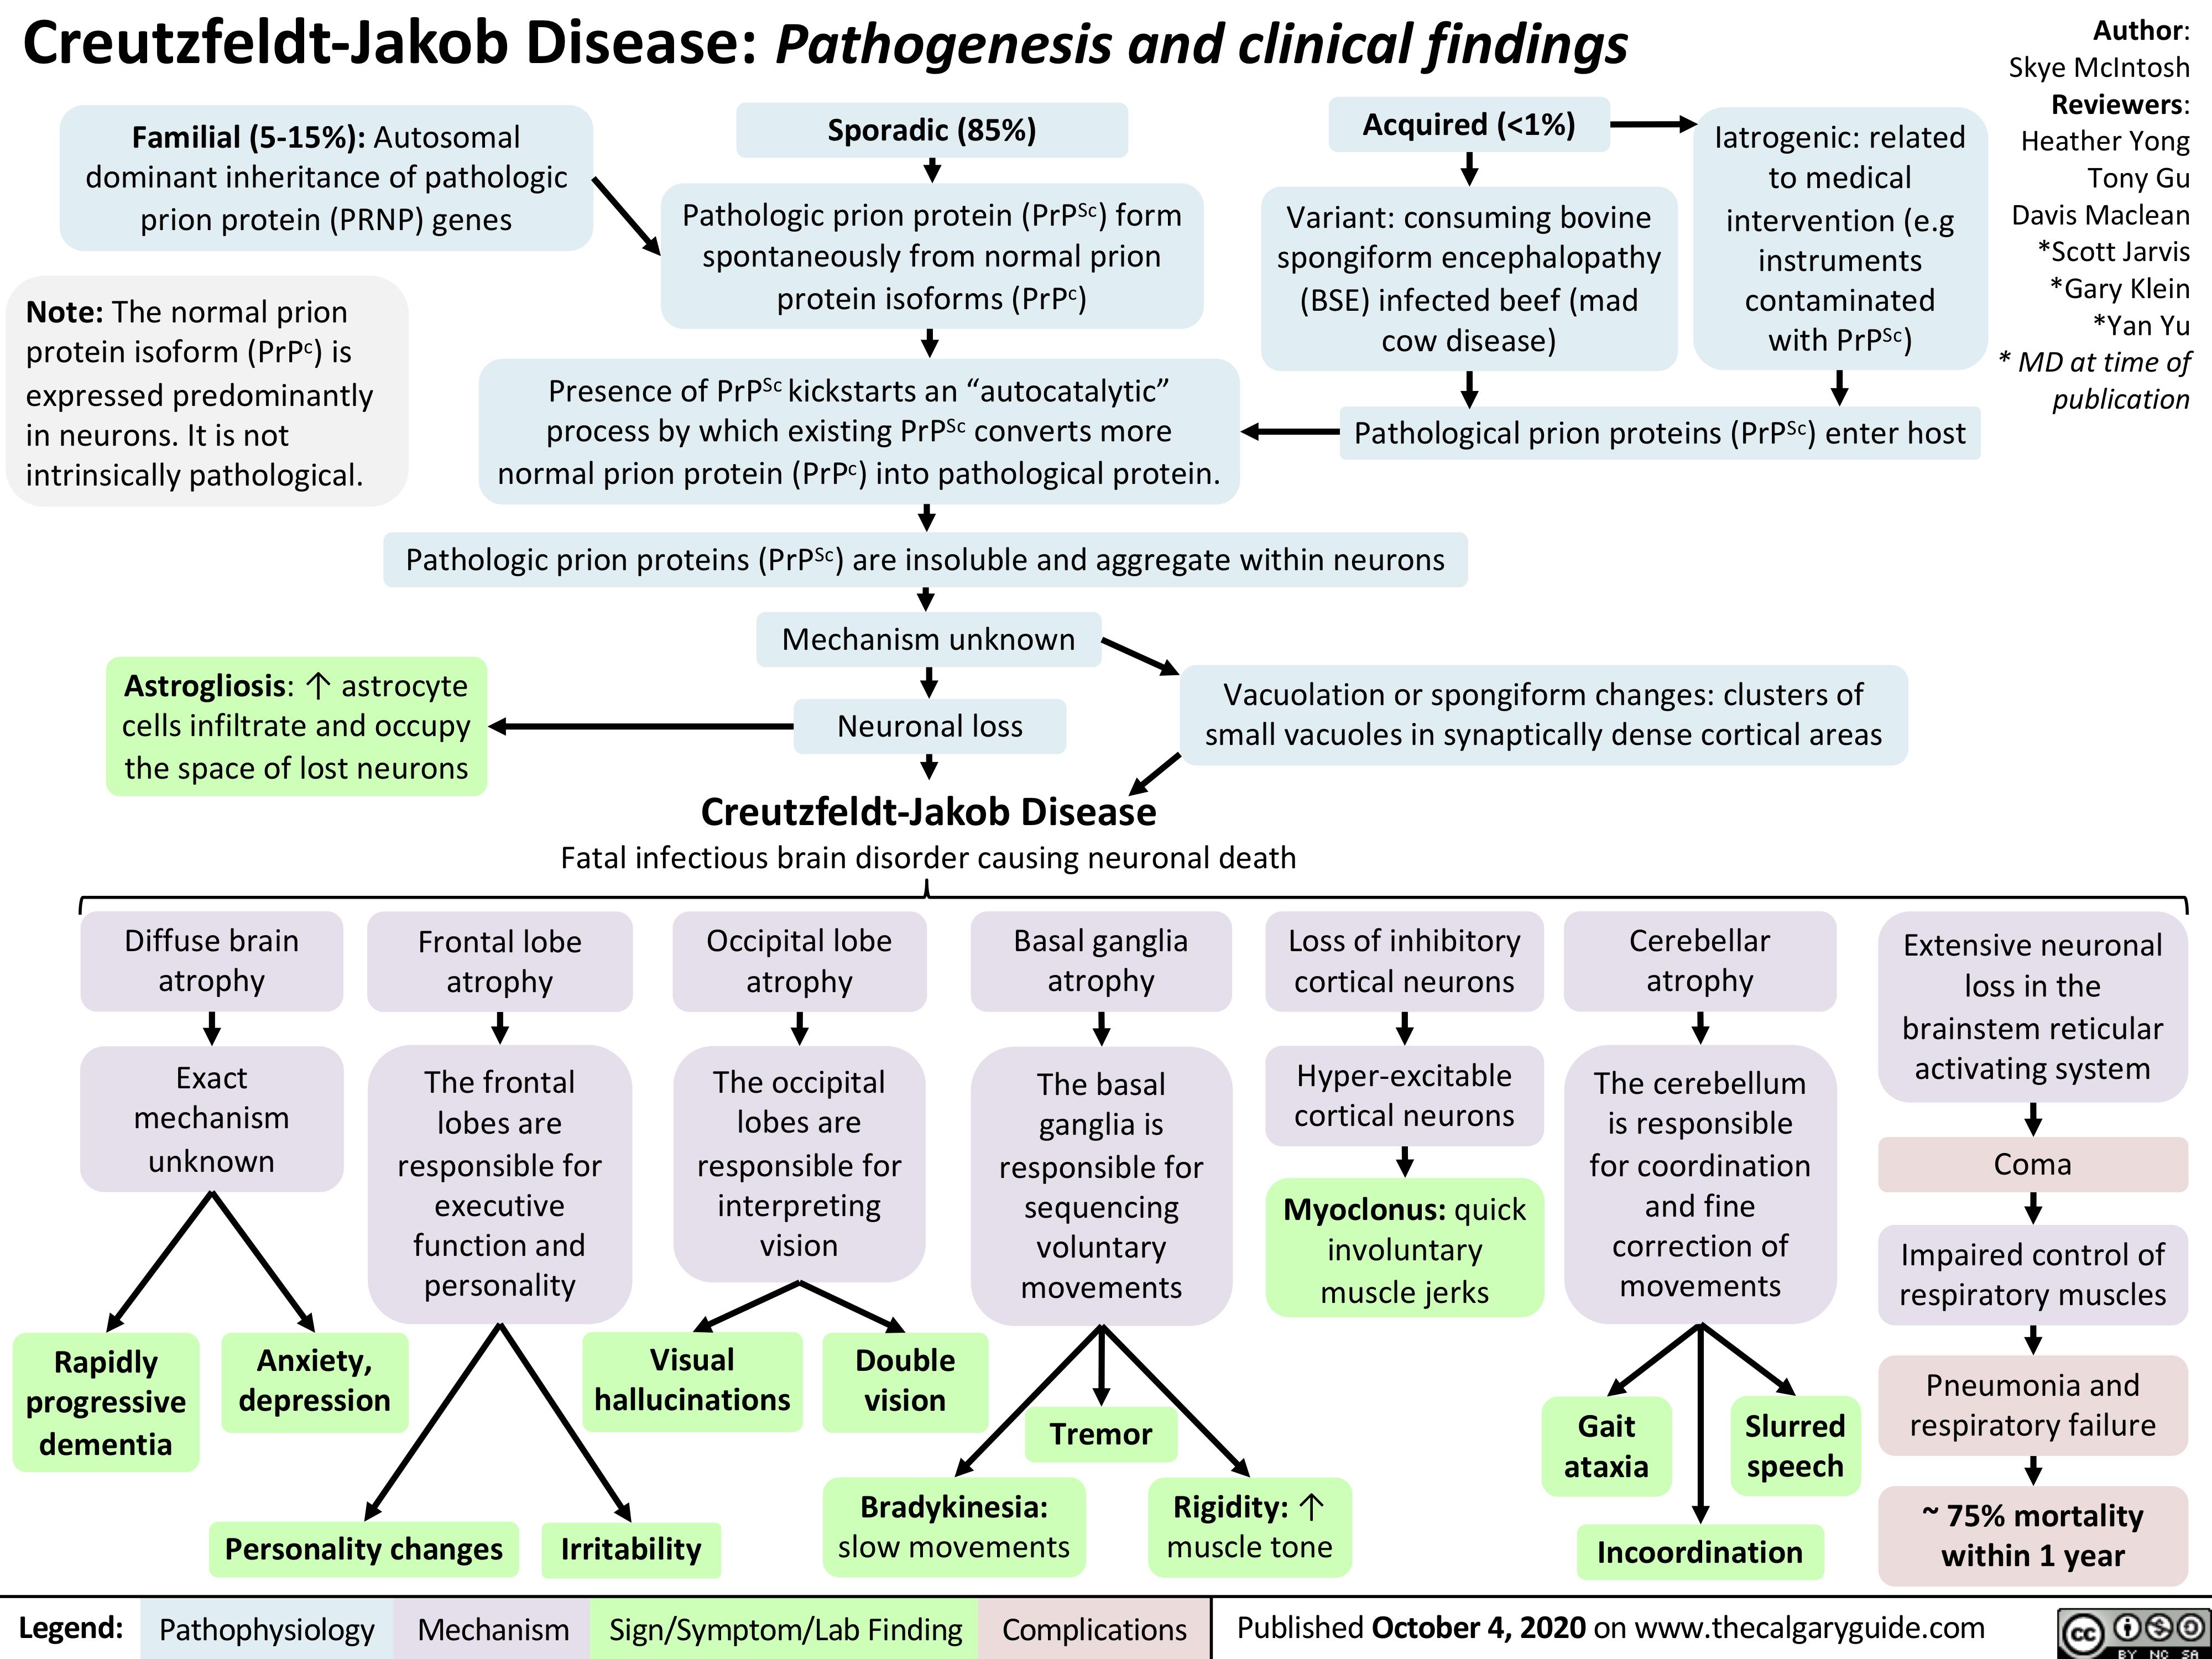 Creutzfeldt-Jakob Disease: Pathogenesis and clinical findings
Author: Skye McIntosh Reviewers: Heather Yong Tony Gu Davis Maclean *Scott Jarvis *Gary Klein *Yan Yu * MD at time of publication
     Familial (5-15%): Autosomal dominant inheritance of pathologic prion protein (PRNP) genes
Sporadic (85%)
Pathologic prion protein (PrPSc) form spontaneously from normal prion protein isoforms (PrPc)
Acquired (<1%)
Variant: consuming bovine spongiform encephalopathy (BSE) infected beef (mad cow disease)
Iatrogenic: related to medical intervention (e.g instruments contaminated with PrPSc)
      Note: The normal prion protein isoform (PrPc) is expressed predominantly in neurons. It is not intrinsically pathological.
Presence of PrPSc kickstarts an “autocatalytic”
process by which existing PrPSc converts more normal prion protein (PrPc) into pathological protein.
Pathological prion proteins (PrPSc) enter host
        Astrogliosis: ↑ astrocyte cells infiltrate and occupy the space of lost neurons
Vacuolation or spongiform changes: clusters of small vacuoles in synaptically dense cortical areas
Pathologic prion proteins (PrPSc) are insoluble and aggregate within neurons Mechanism unknown
       Neuronal loss
Creutzfeldt-Jakob Disease
Fatal infectious brain disorder causing neuronal death
           Diffuse brain atrophy
Exact mechanism unknown
Frontal lobe atrophy
The frontal lobes are responsible for executive function and personality
Occipital lobe atrophy
The occipital lobes are responsible for interpreting vision
Basal ganglia atrophy
The basal
ganglia is responsible for sequencing voluntary movements
Loss of inhibitory cortical neurons
Hyper-excitable cortical neurons
Myoclonus: quick involuntary muscle jerks
Cerebellar atrophy
The cerebellum is responsible for coordination and fine correction of movements
Gait Slurred
Extensive neuronal loss in the brainstem reticular activating system
Coma
Impaired control of respiratory muscles
Pneumonia and respiratory failure
~ 75% mortality within 1 year
                              Rapidly progressive dementia
Anxiety, depression
Visual hallucinations
Double vision
Bradykinesia:
Tremor
       Rigidity: ↑ muscle tone
ataxia
speech Incoordination
    Personality changes
Irritability
slow movements
 Legend:
 Pathophysiology
 Mechanism
Sign/Symptom/Lab Finding
  Complications
Published October 4, 2020 on www.thecalgaryguide.com
   